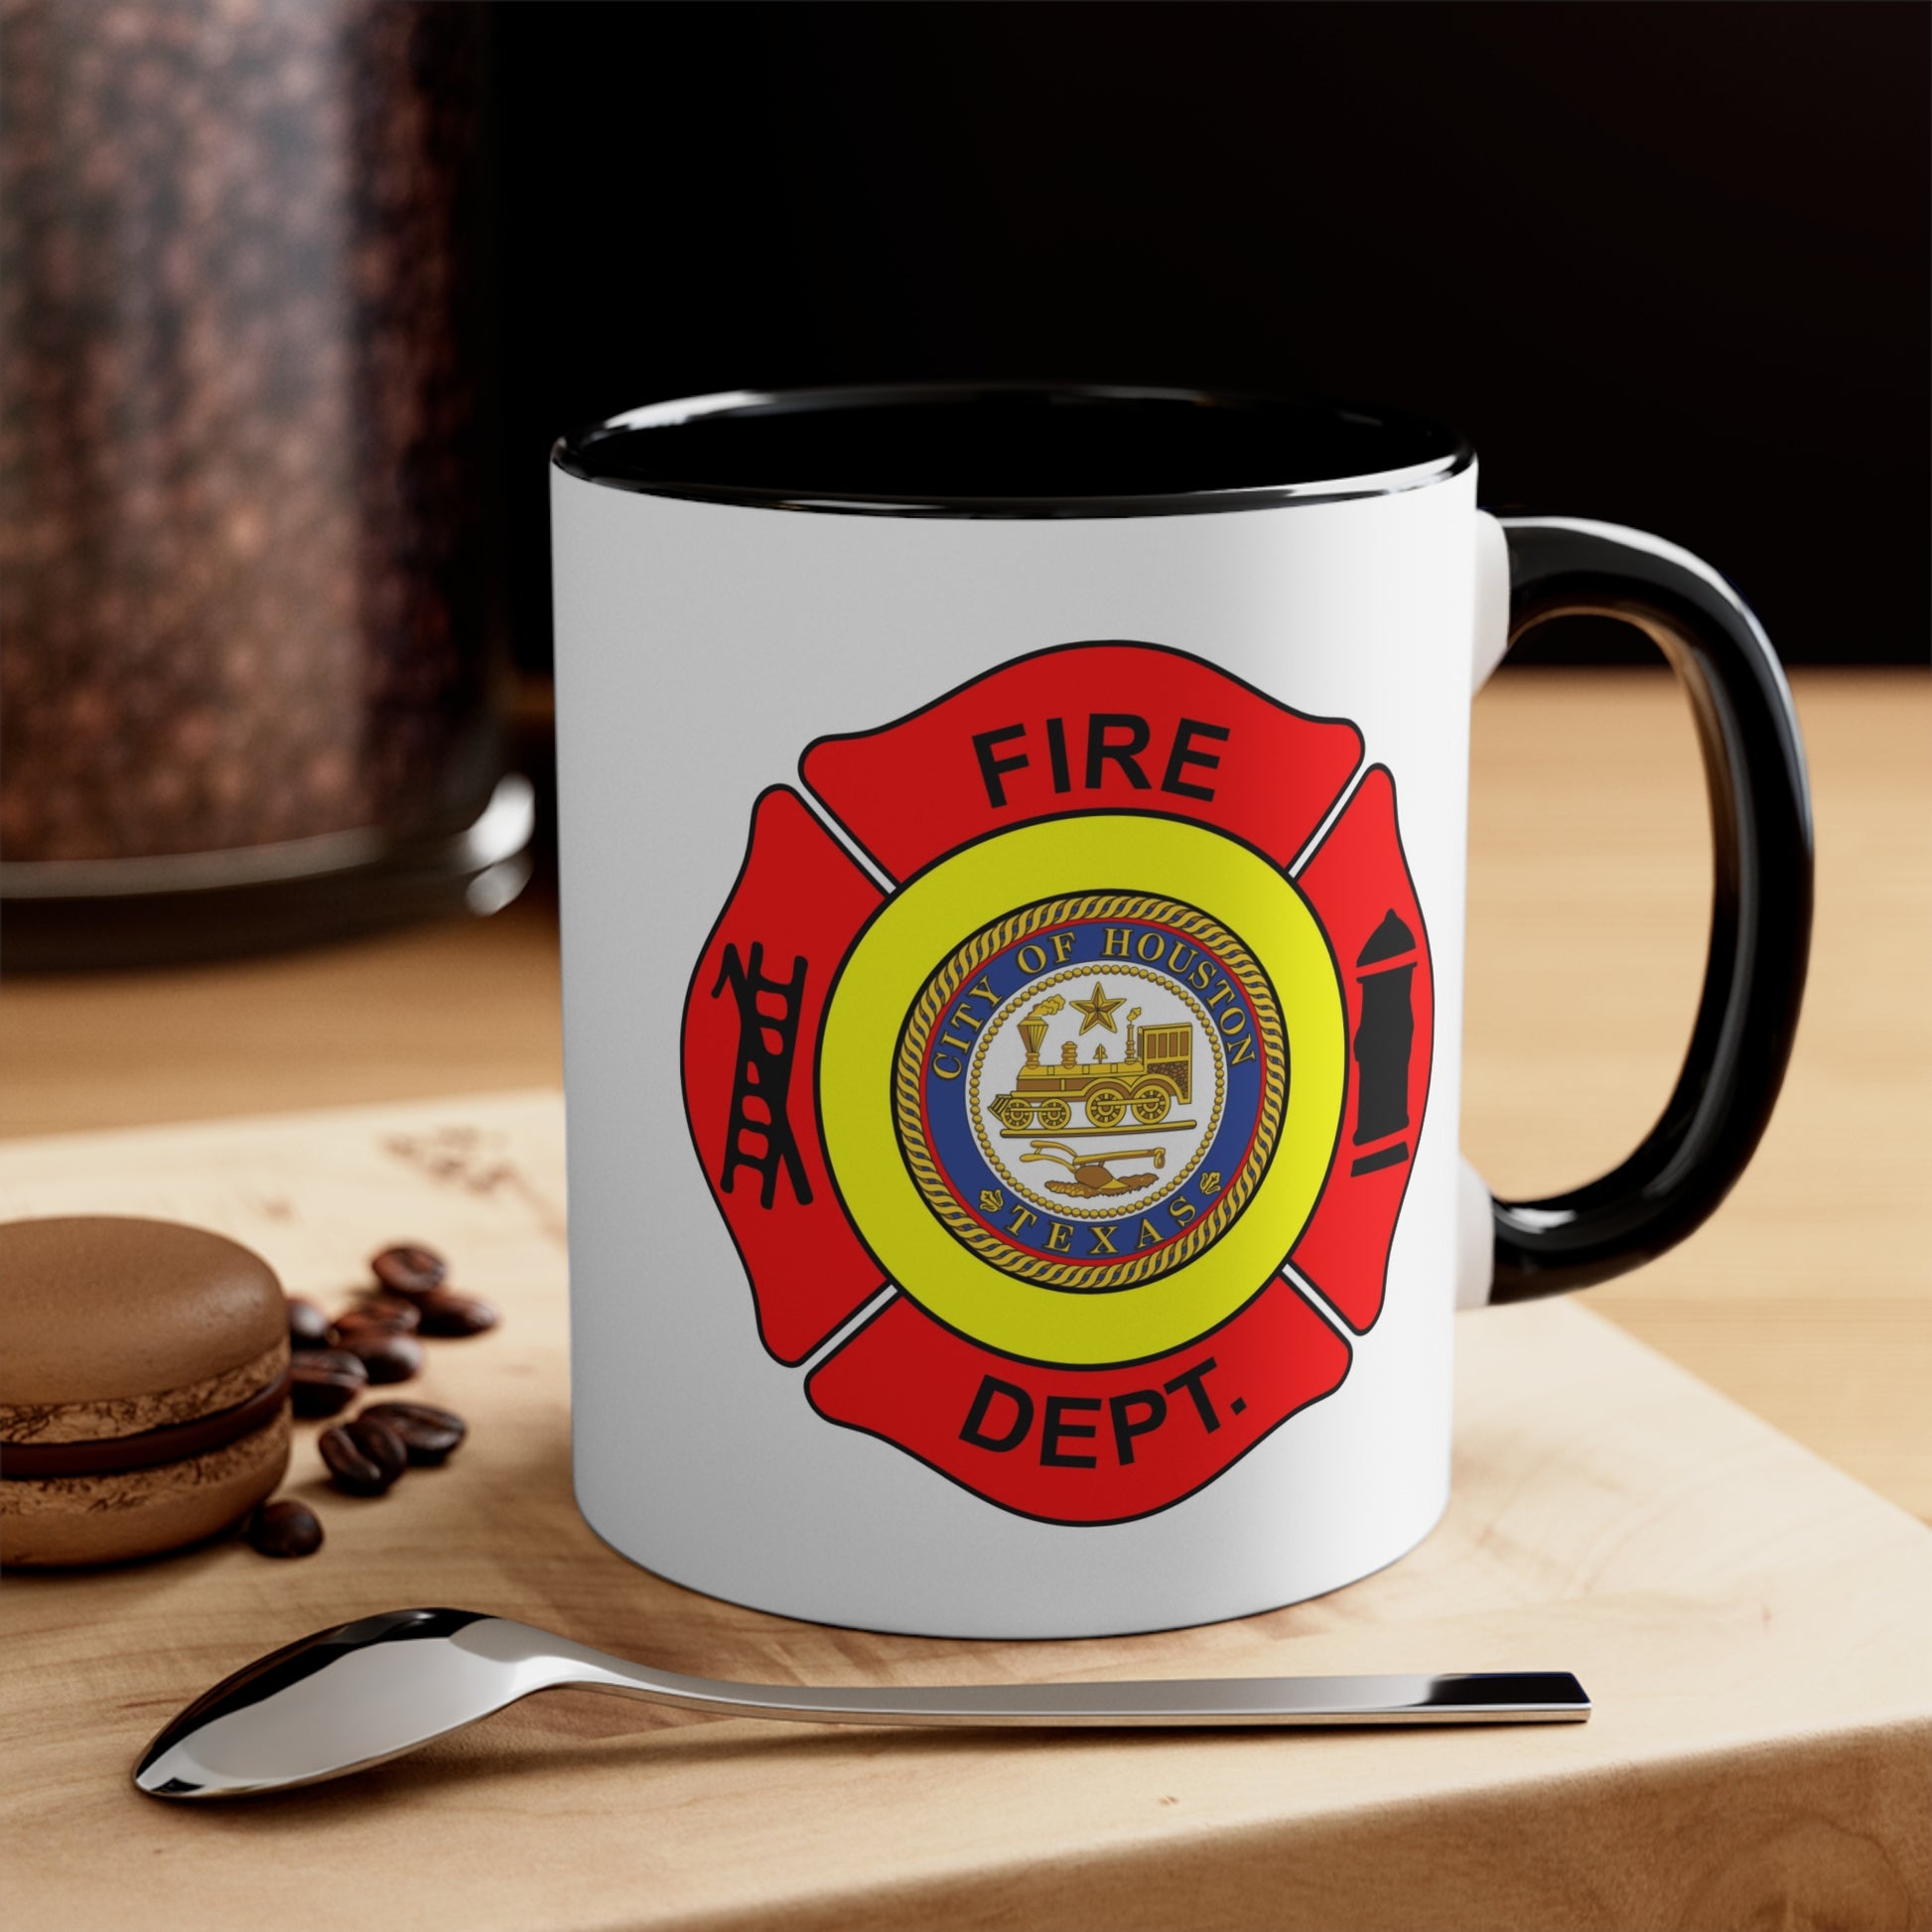 Houston Fire Department Coffee Mug - Double Sided Black Accent White Ceramic 11oz by TheGlassyLass